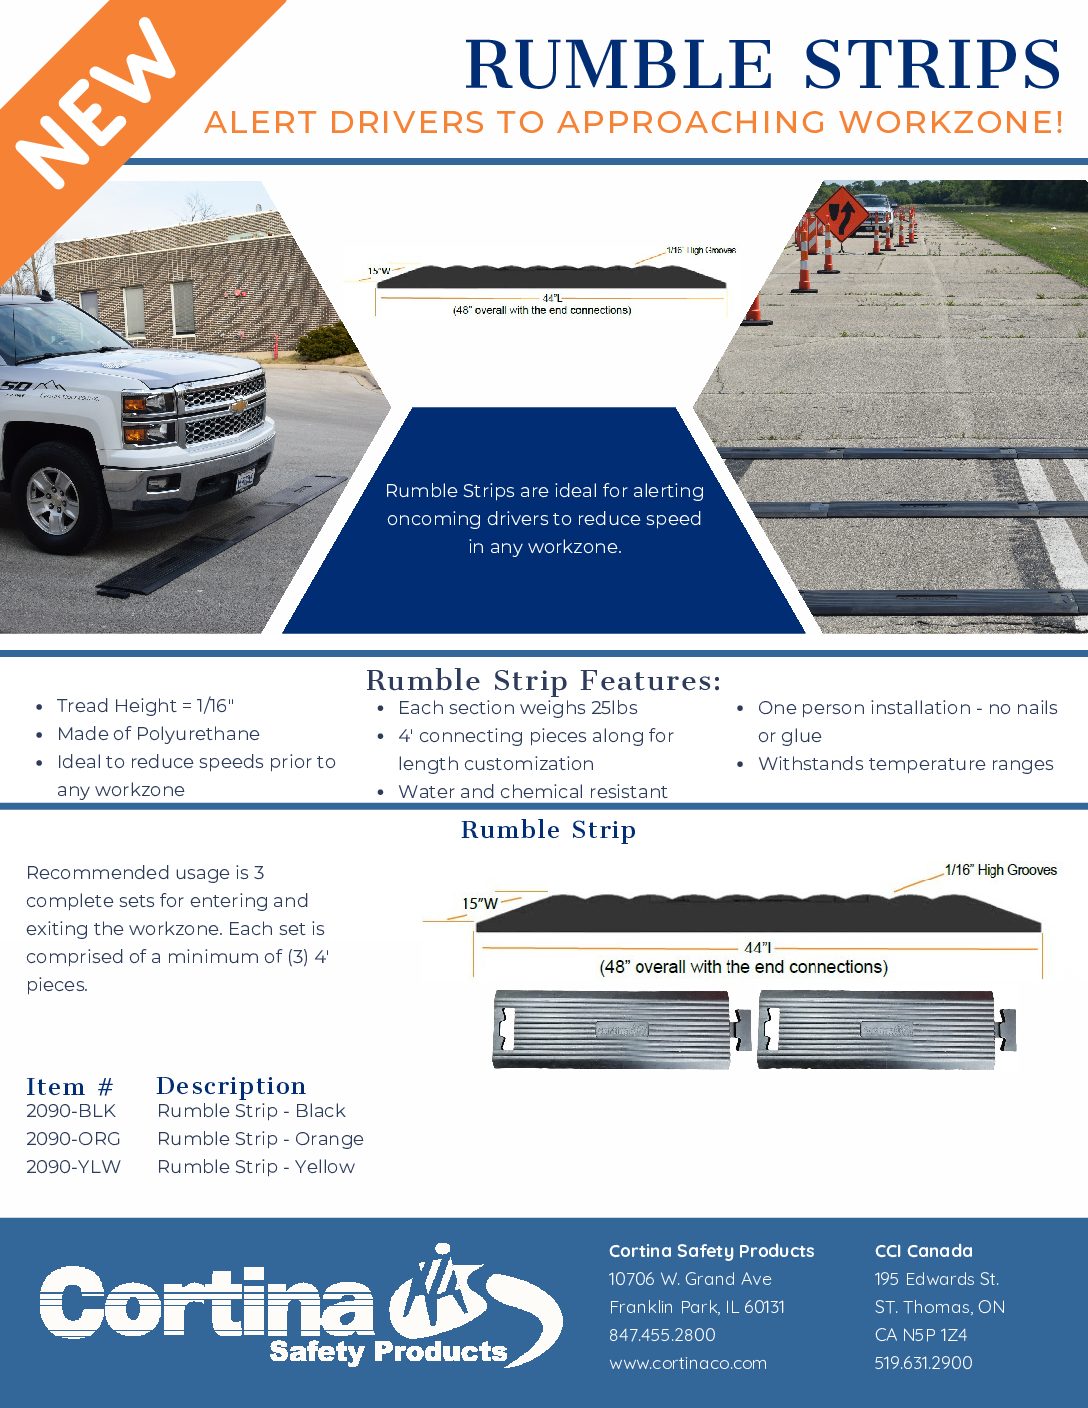 New Product: Rumble Strips